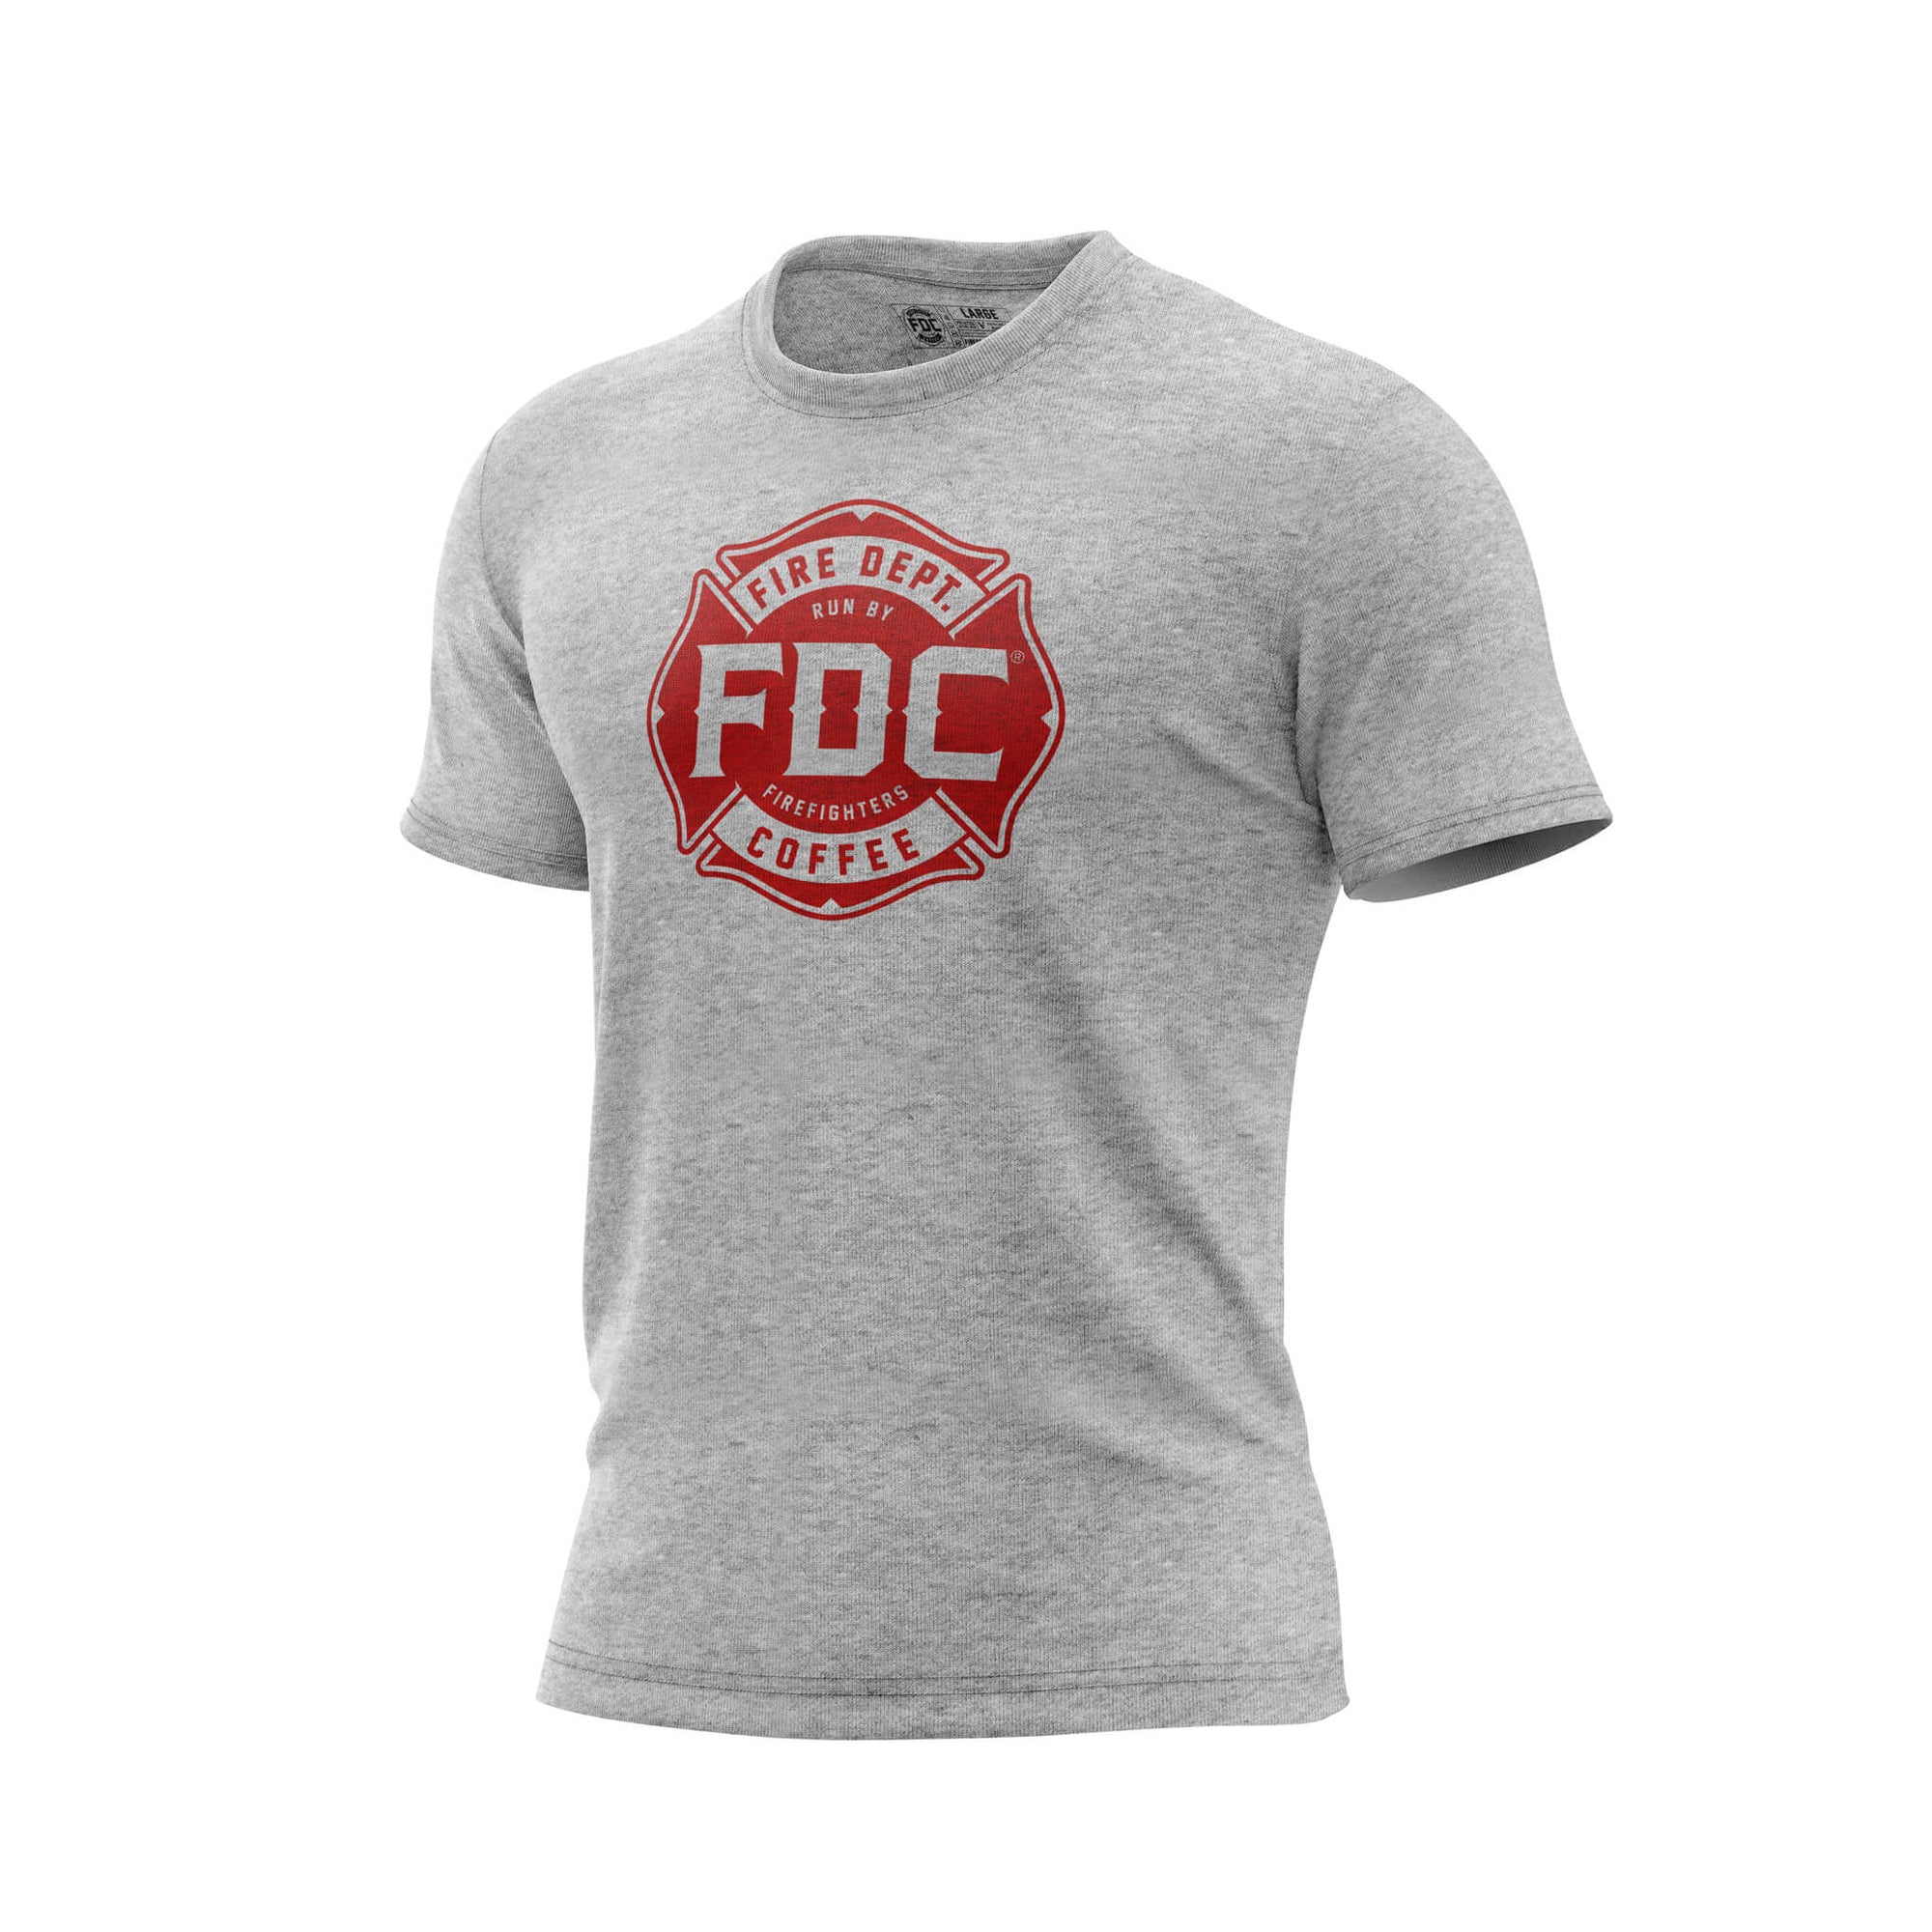 A gray t-shirt with the red Fire Department Coffee maltese cross logo on the front